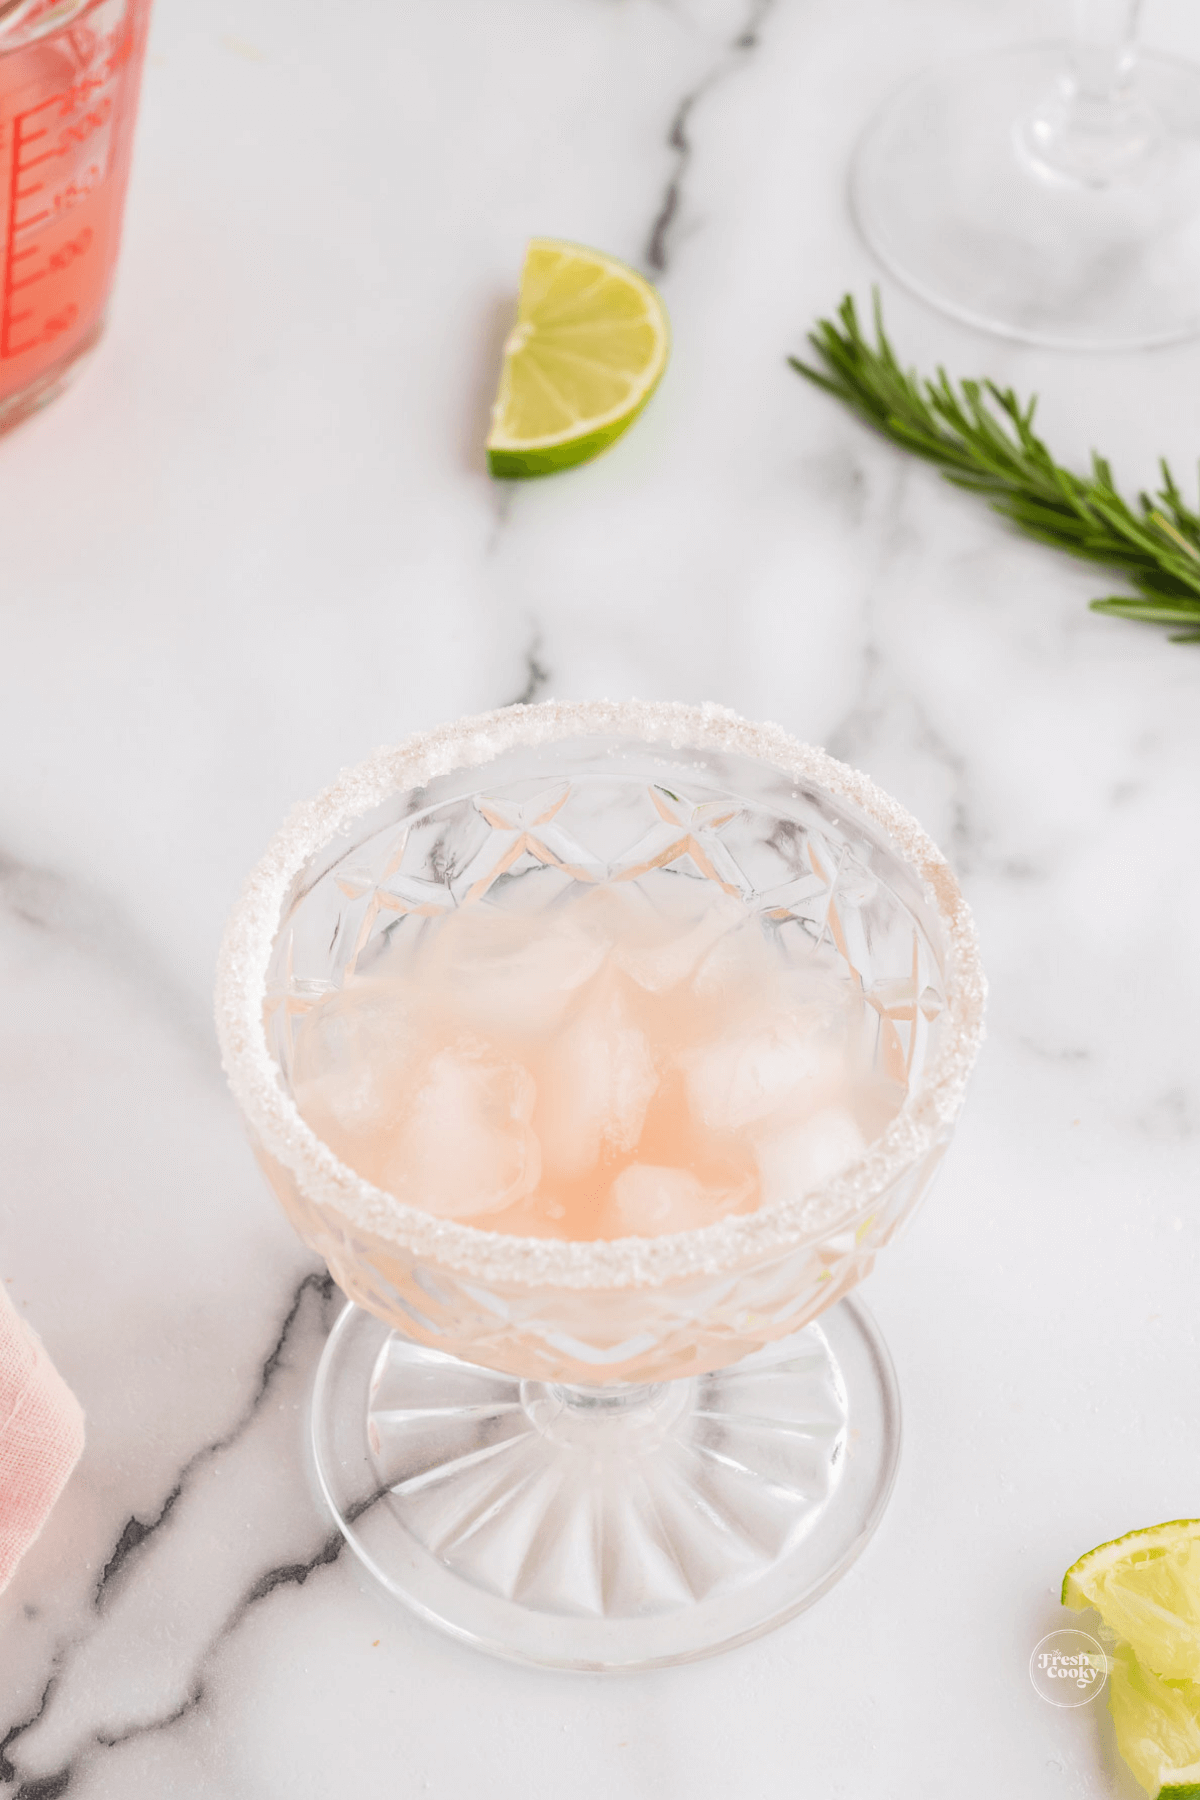 Pour grapefruit juice into glass with ice, squeeze the lime.